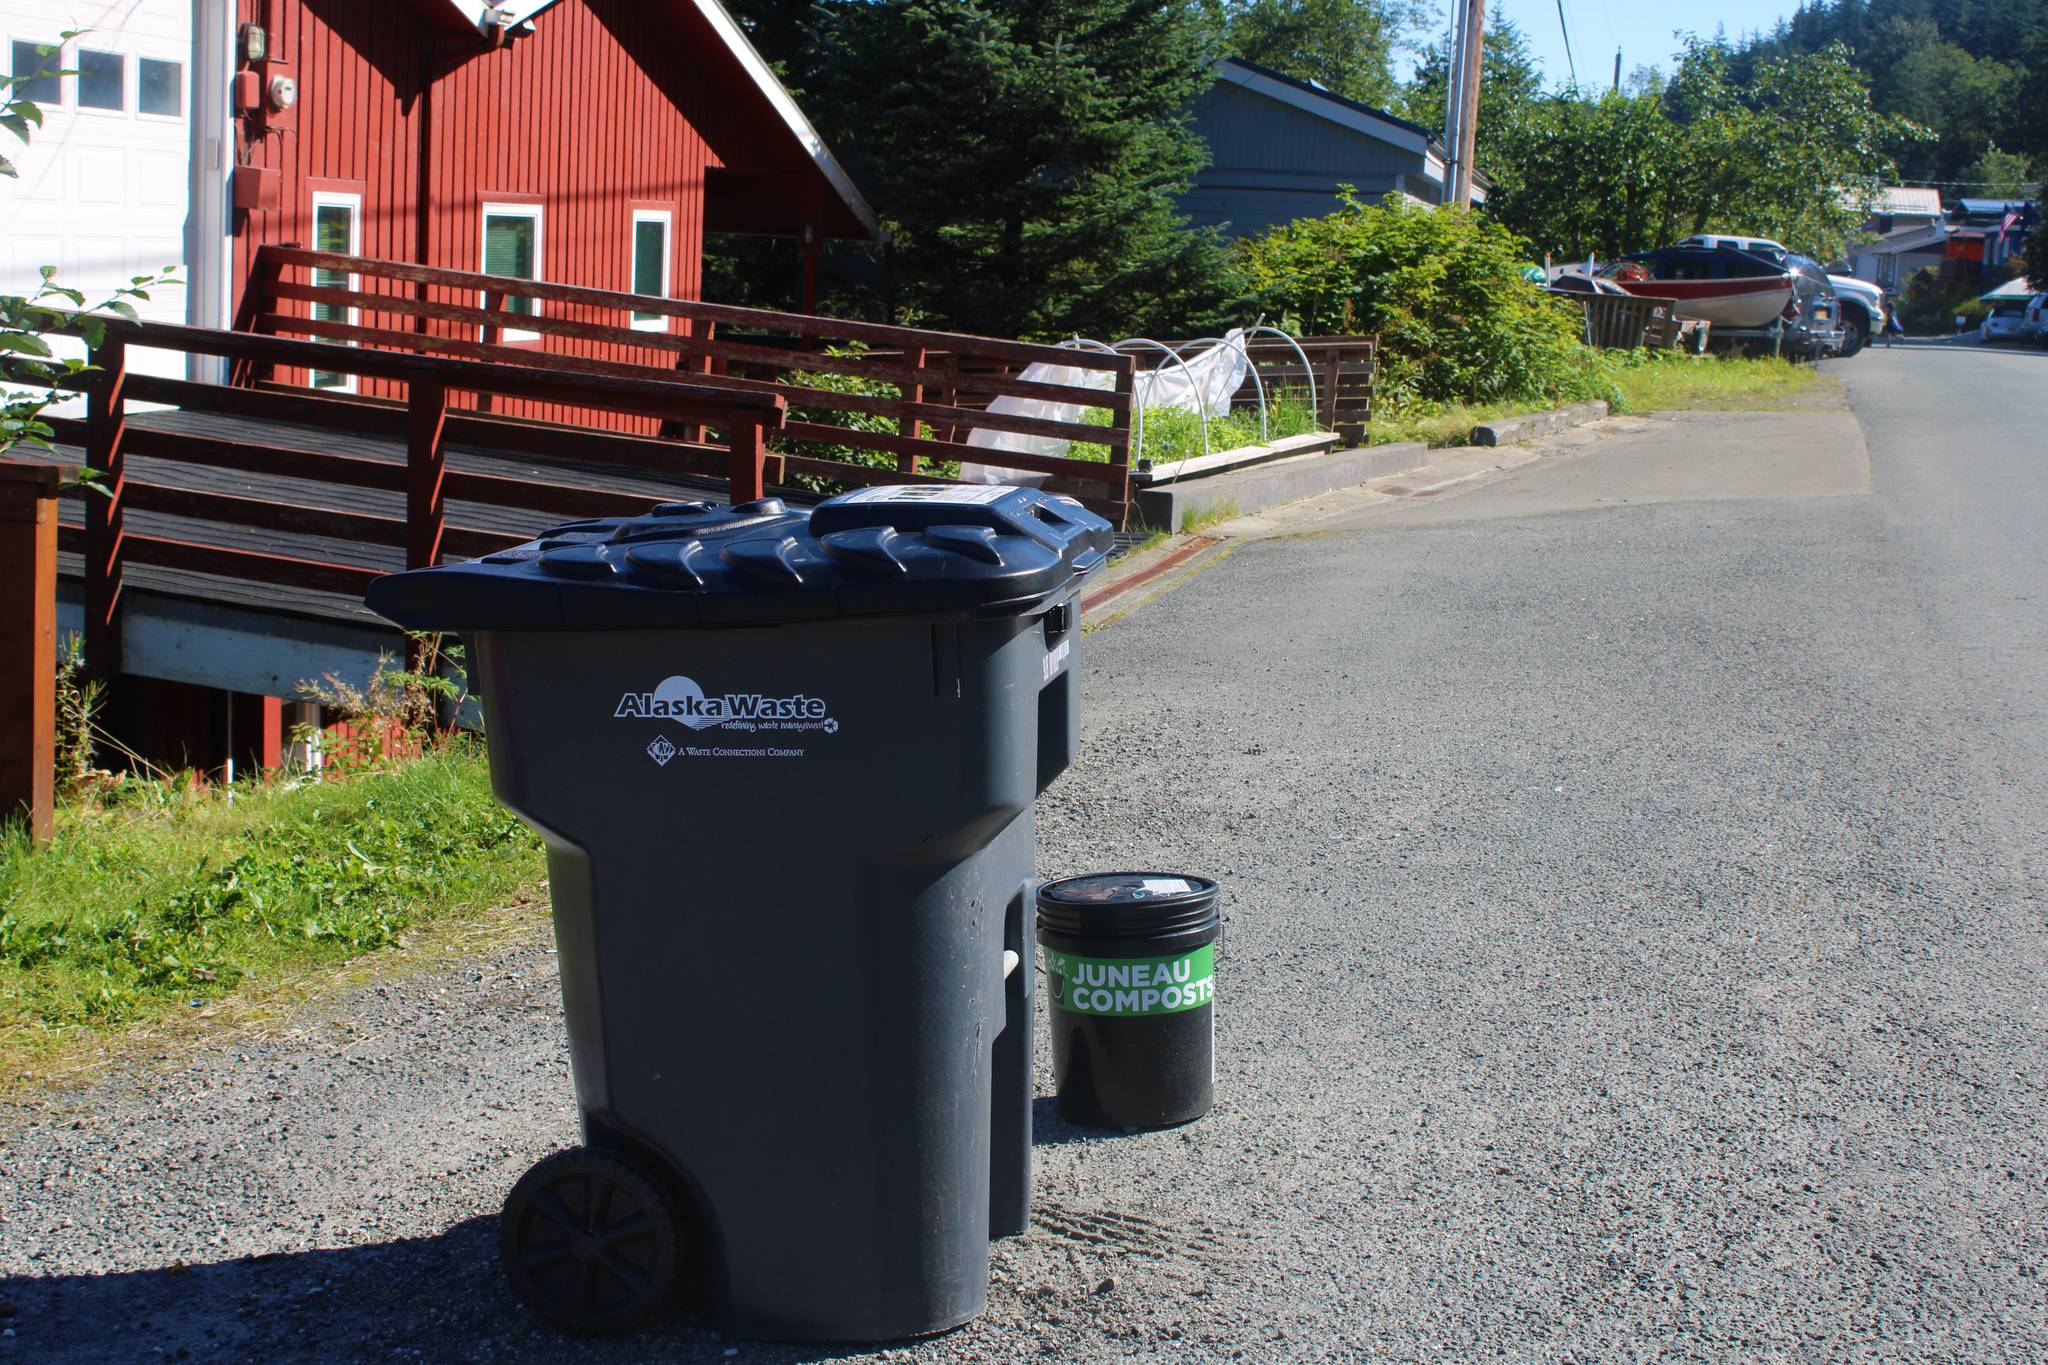 Dana Zigmund/Juneau Empire 
A garbage can sits next to a bin from Juneau Compost on Douglas on August 31. According to company officials, each day Juneau adds about 100 tons of garbage to the Capitol Disposal Landfill near Lemon Creek. At that rate, officials expect the landfill to be full in about 20 years. The city is exploring new ways to deal with Juneau’s waste stream, including composting options.